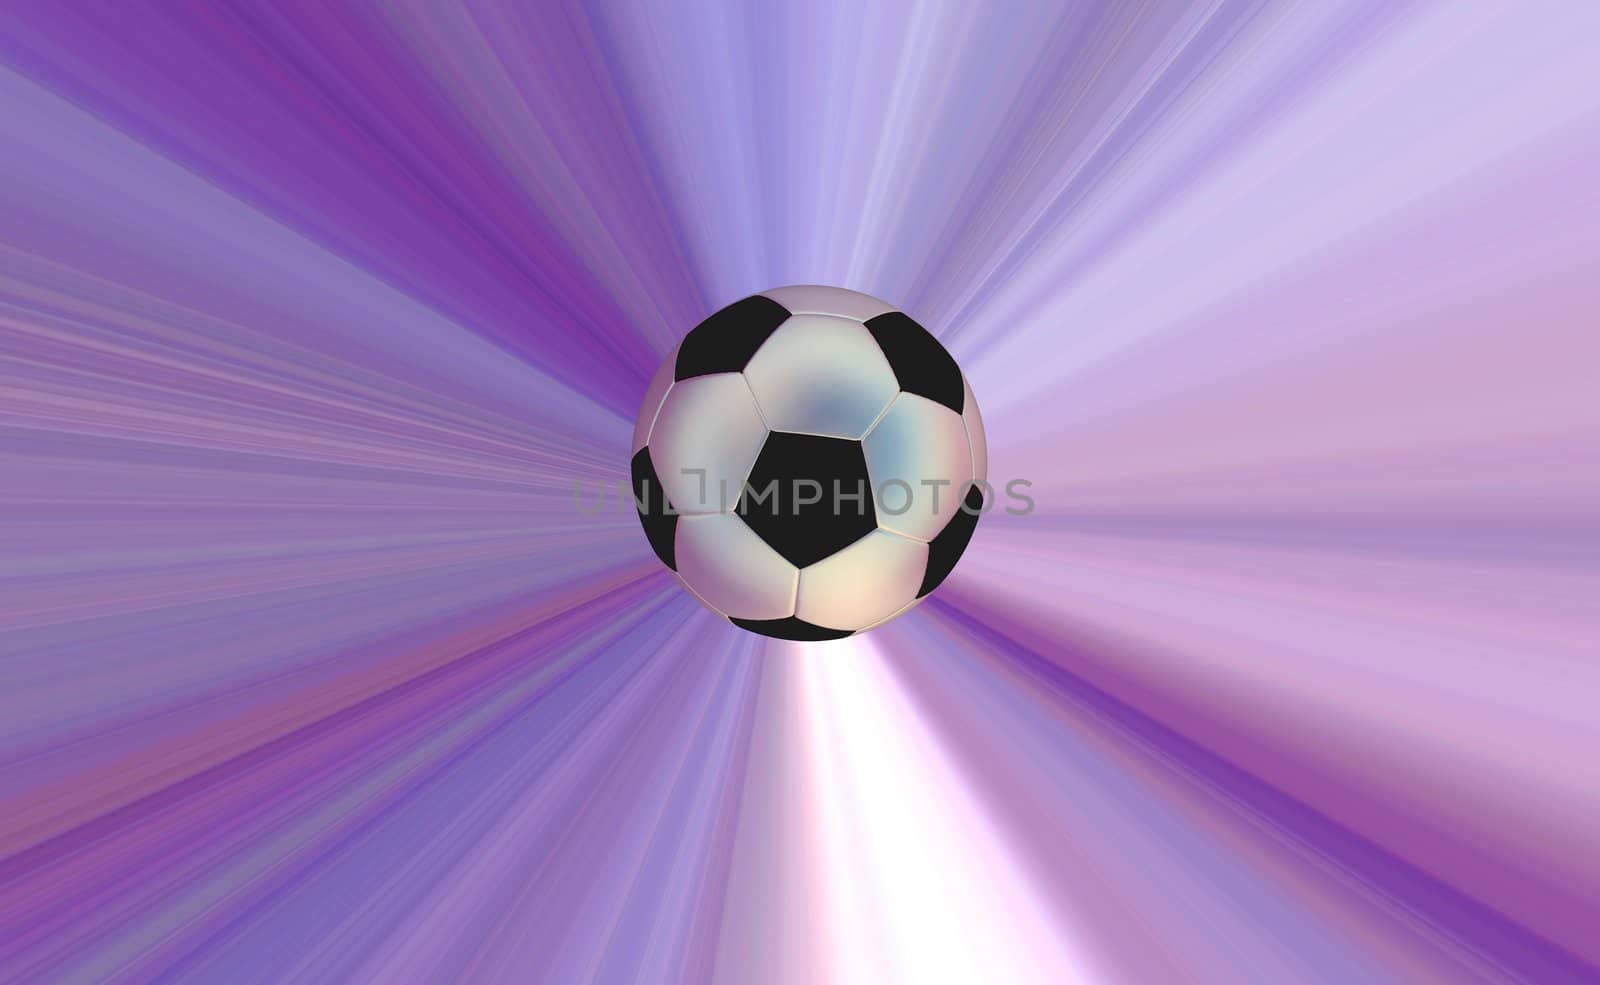 Soccerball over abstract background